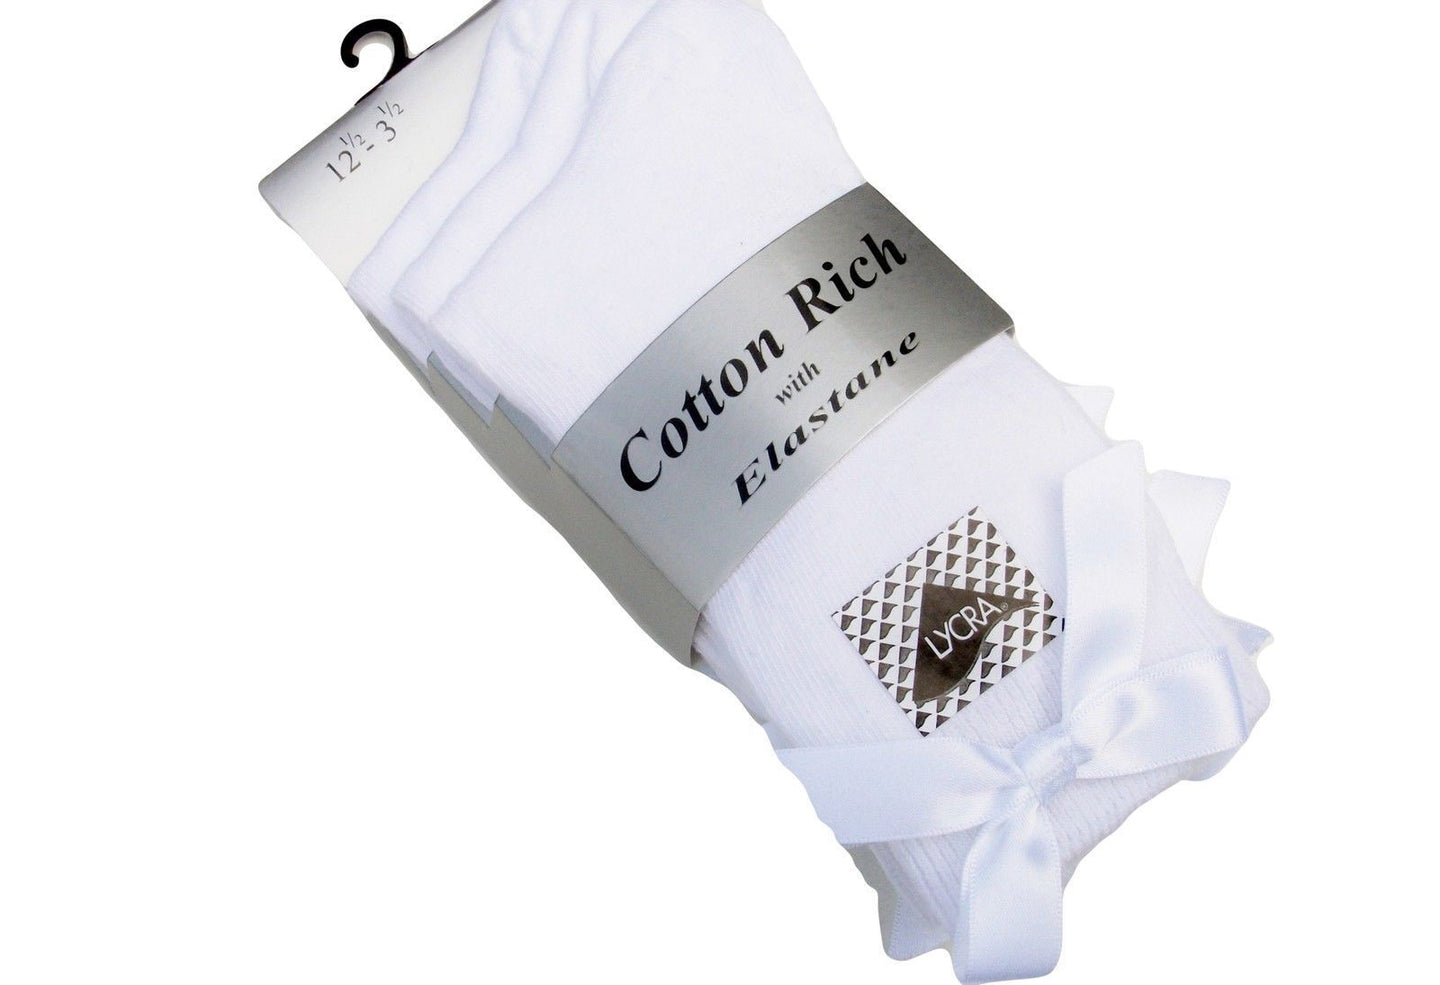 3 x Pairs Girls Dress Ankle Socks With a Bow Cotton Rich Navy & White